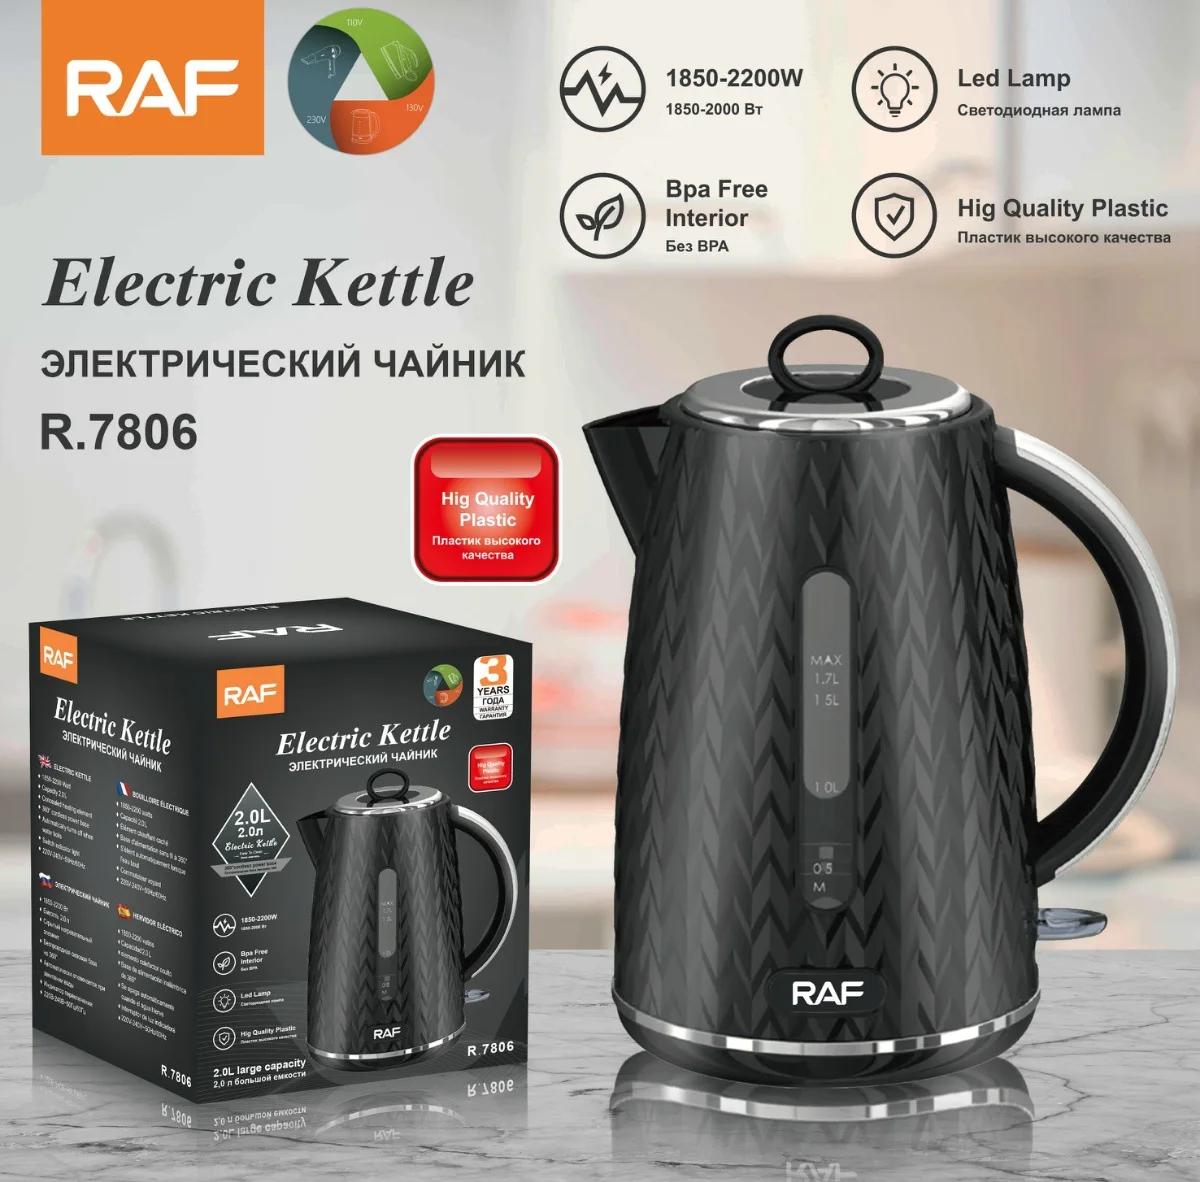 

Stainless Steel Electric Kettle Hot Water Boiler 1.7L 2200W Fast Boiling BPA Free with Automatic Shut Off & Boil Dry Protection